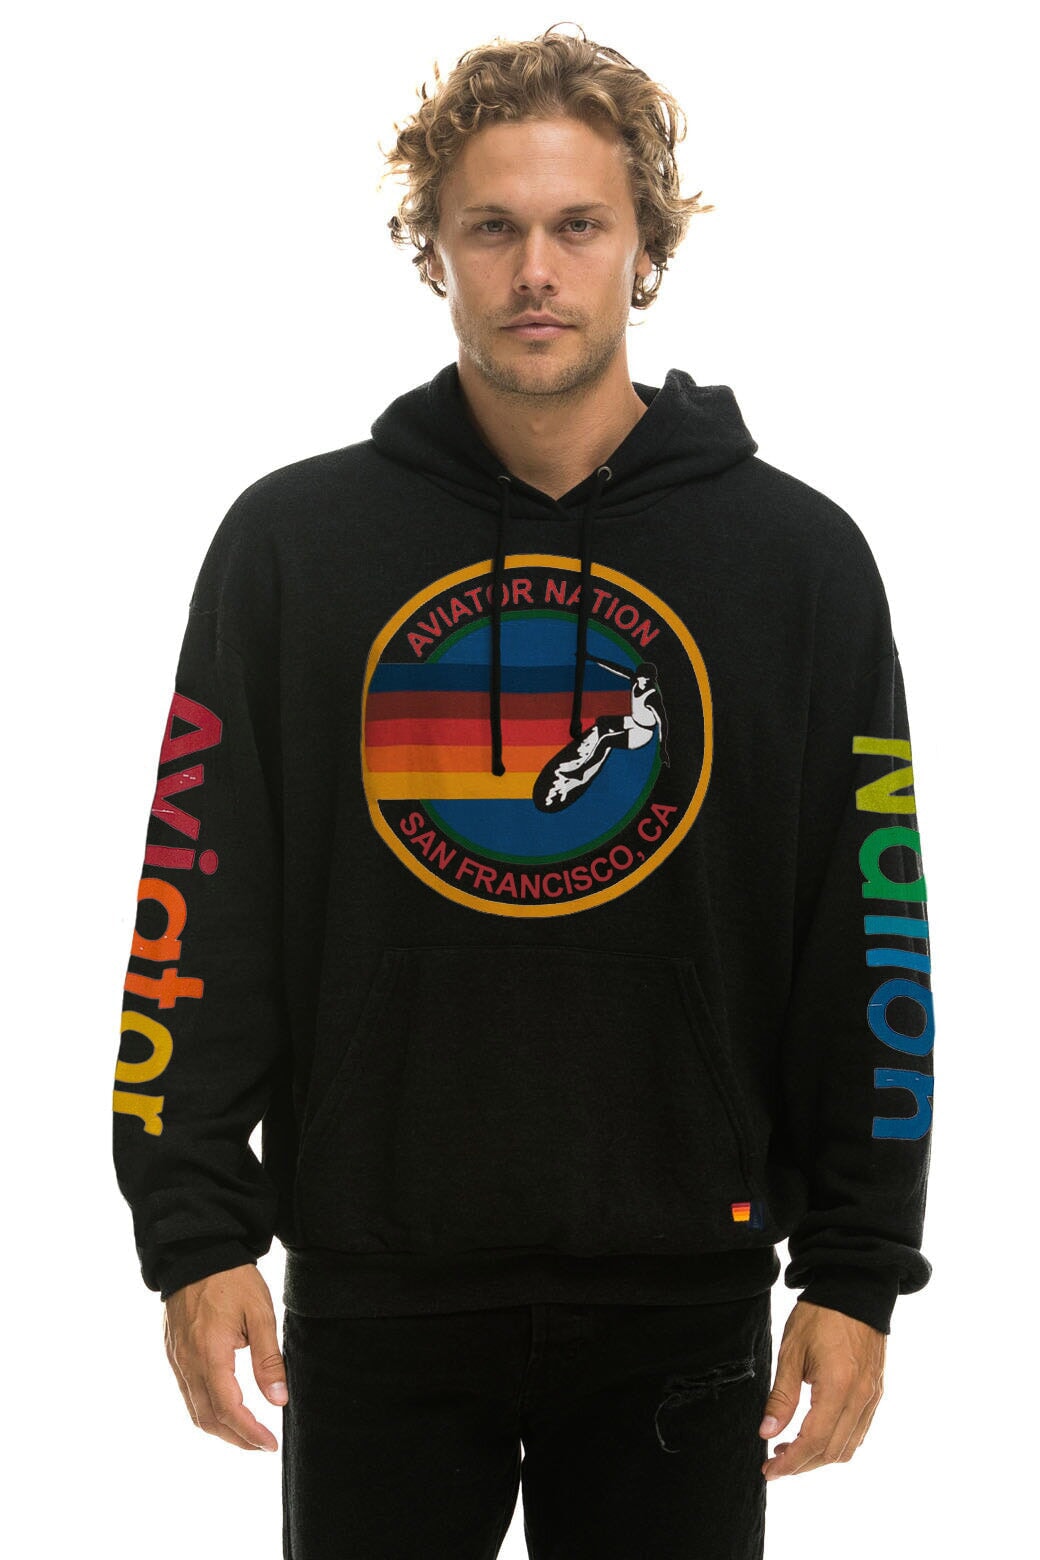 AVIATOR NATION SAN FRANCISCO RELAXED PULLOVER HOODIE - BLACK Hoodie Aviator Nation 